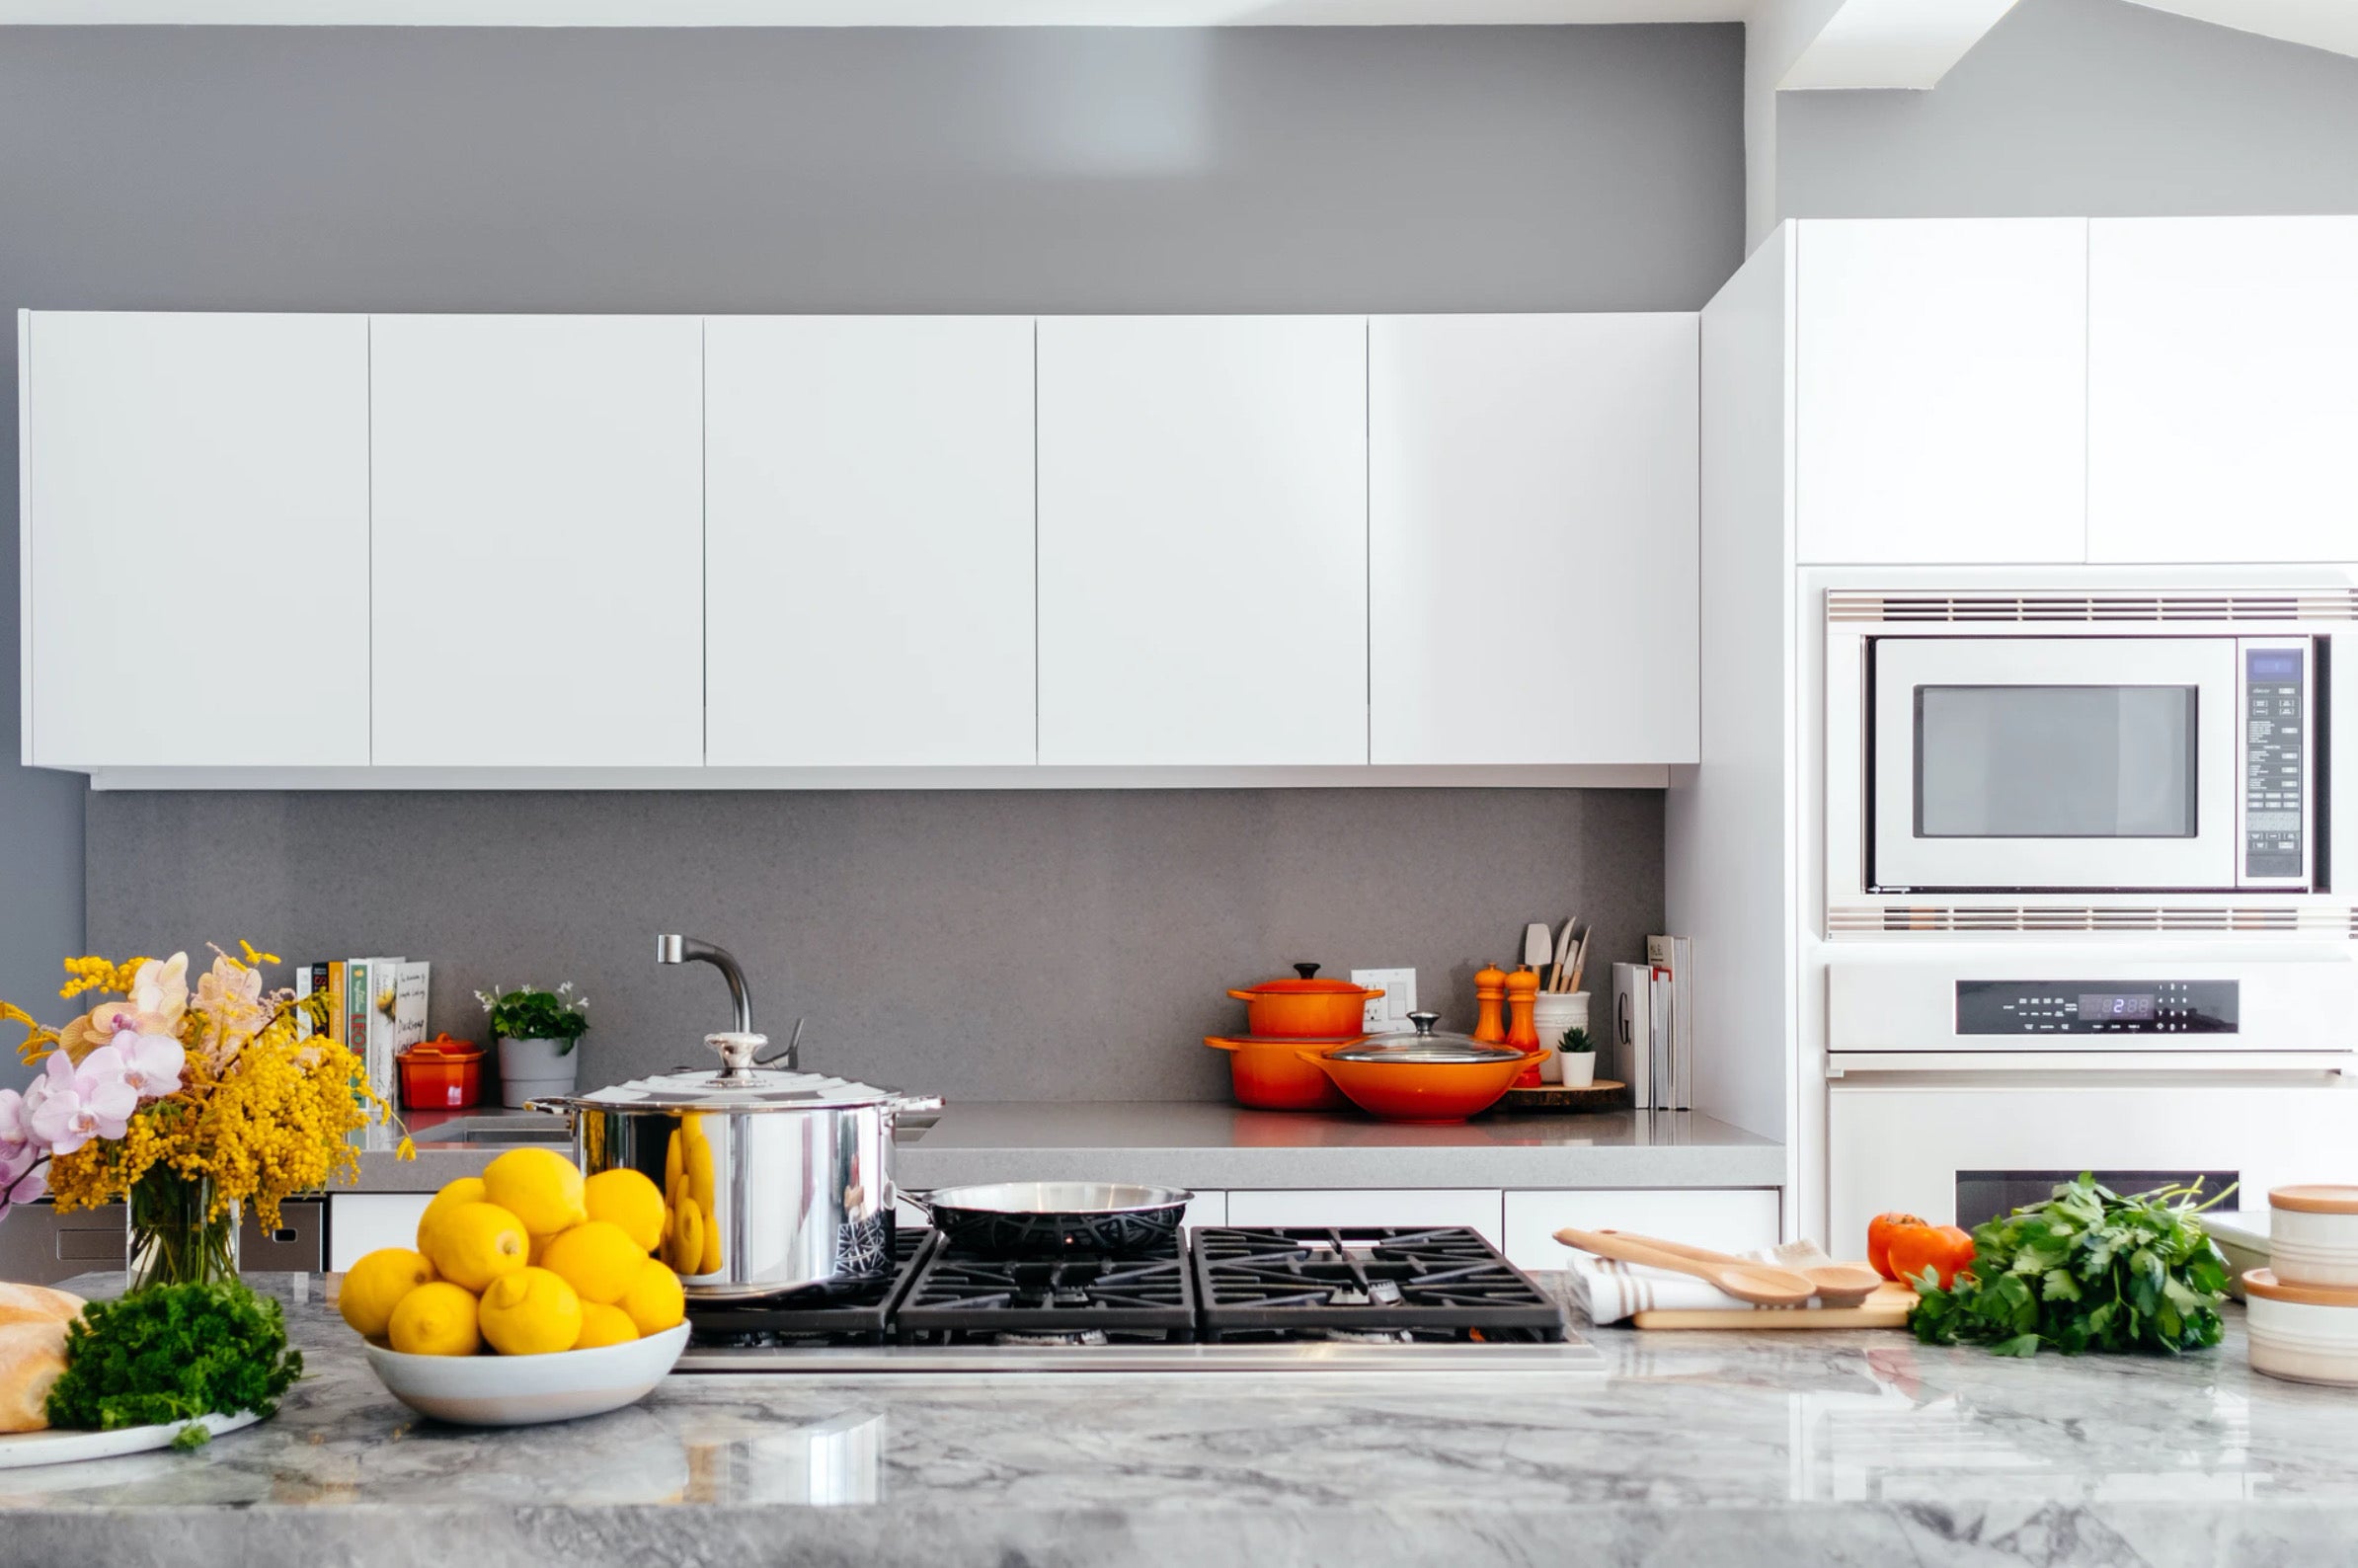 Five tips for good hygiene in your kitchen